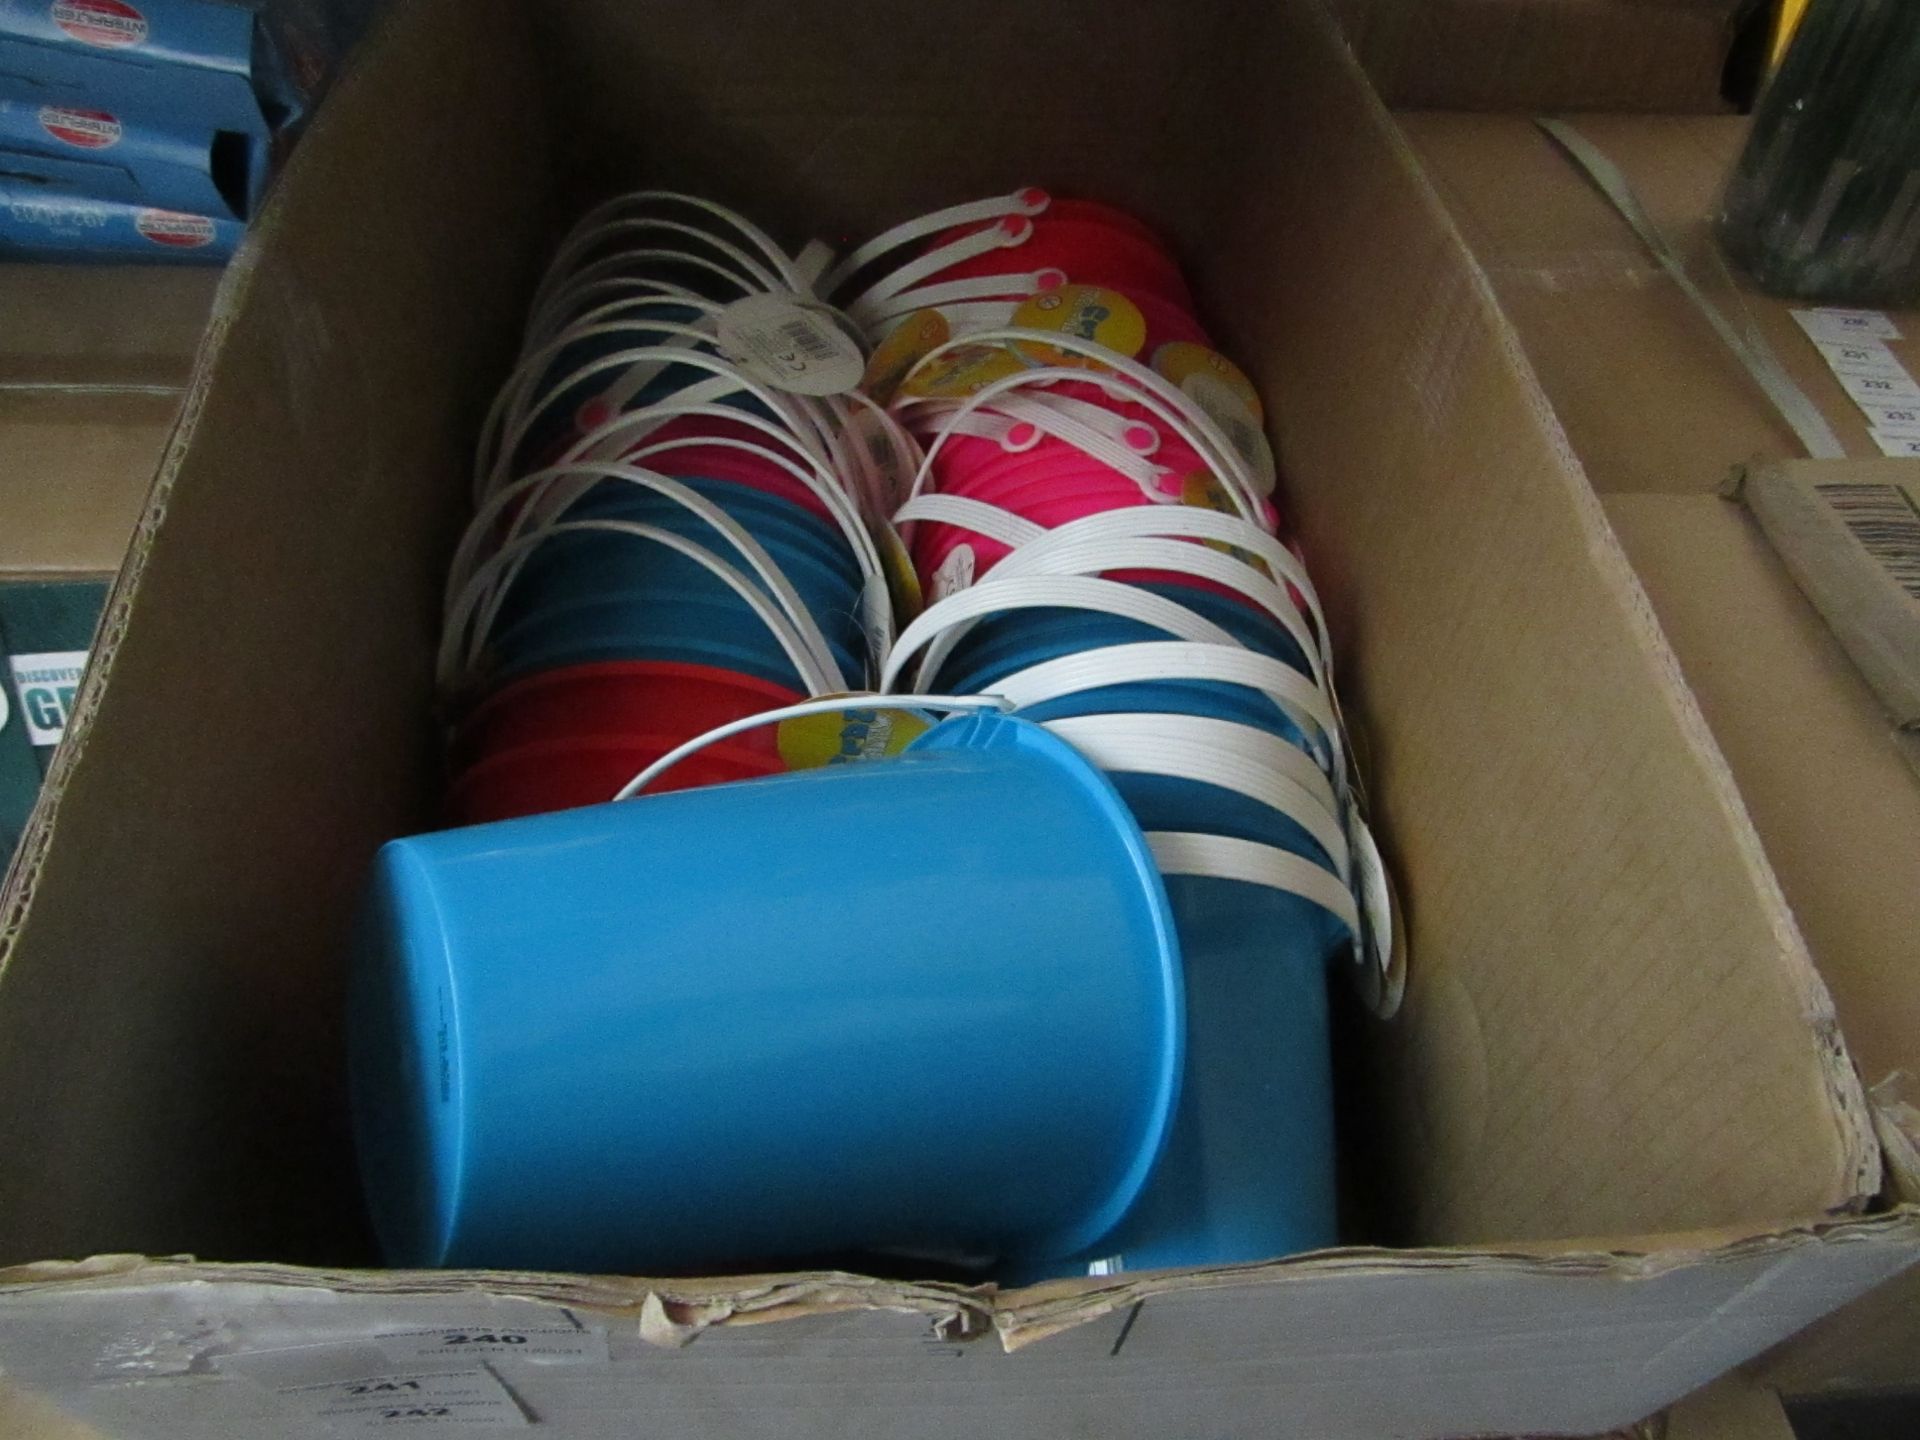 6x Colourful Sand play buckets - New, Also The Colour may vary to the picture.